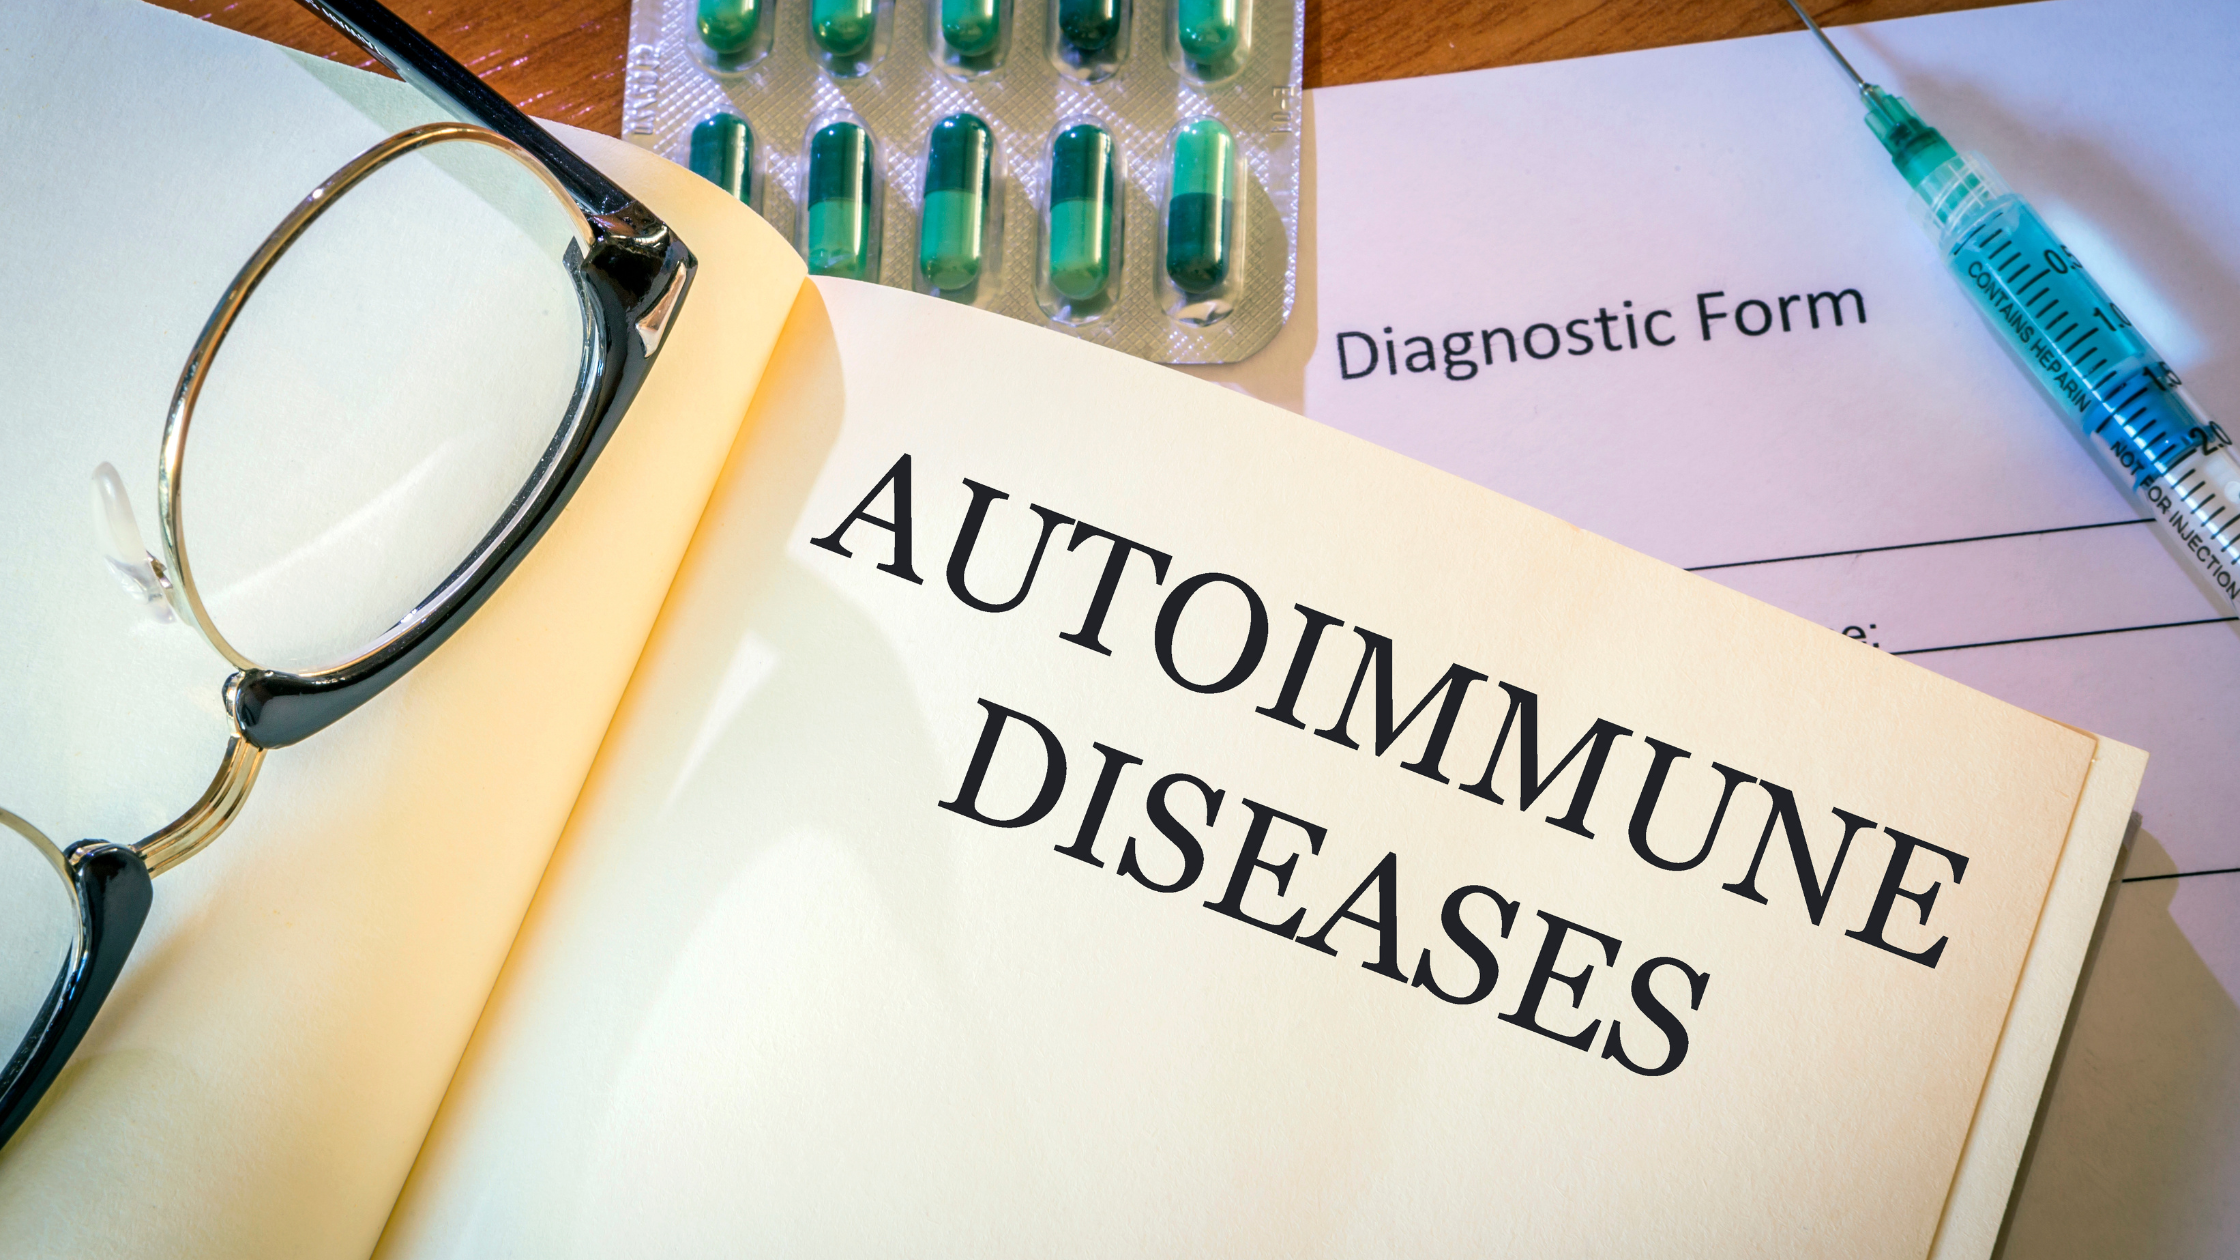 medical textbook open to "autoimmune diseases" with syringe, pills and a diagnostic form